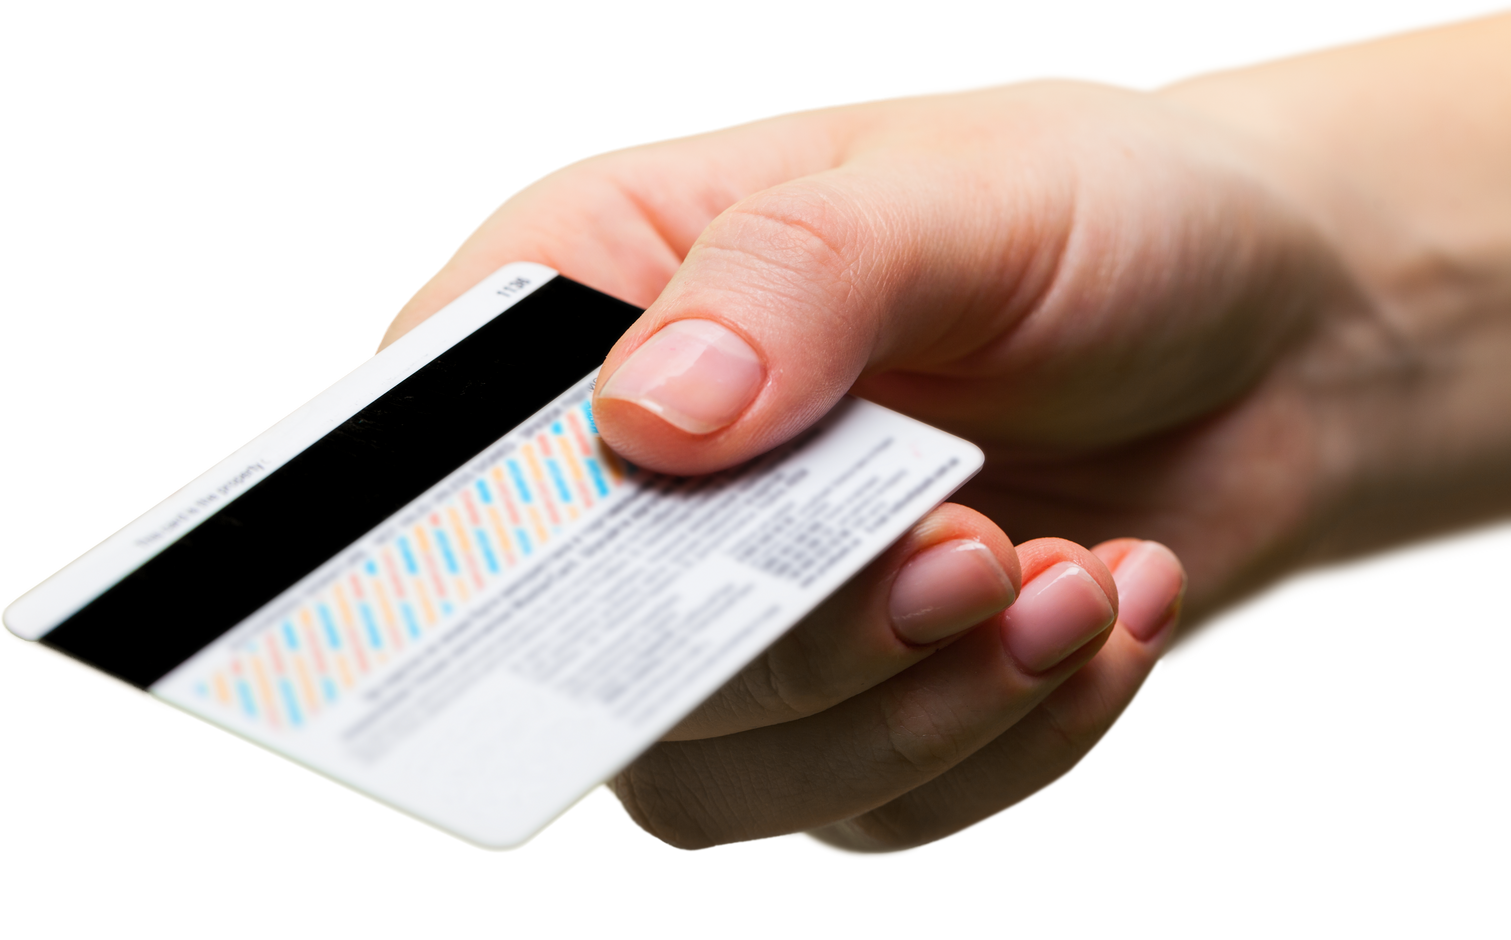 Credit card in a person's hand - isolated image